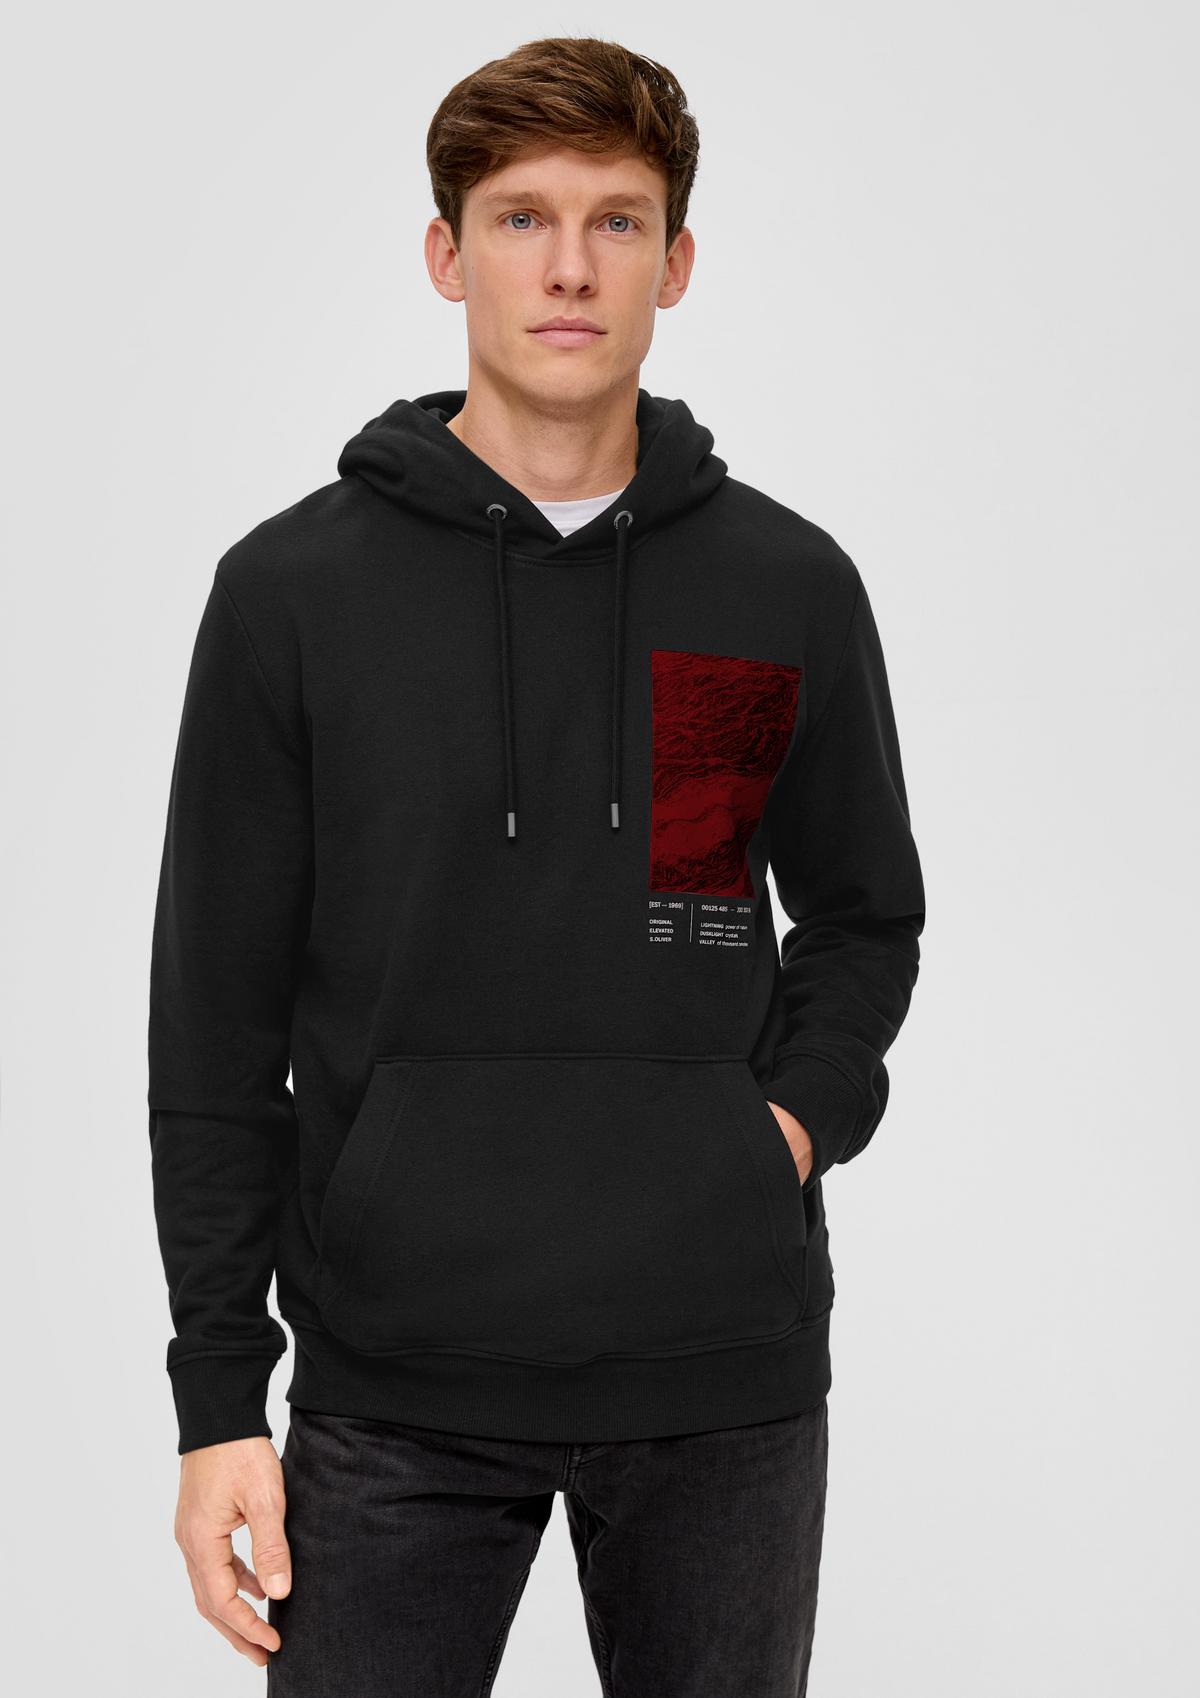 Sweatshirt with a front black - print